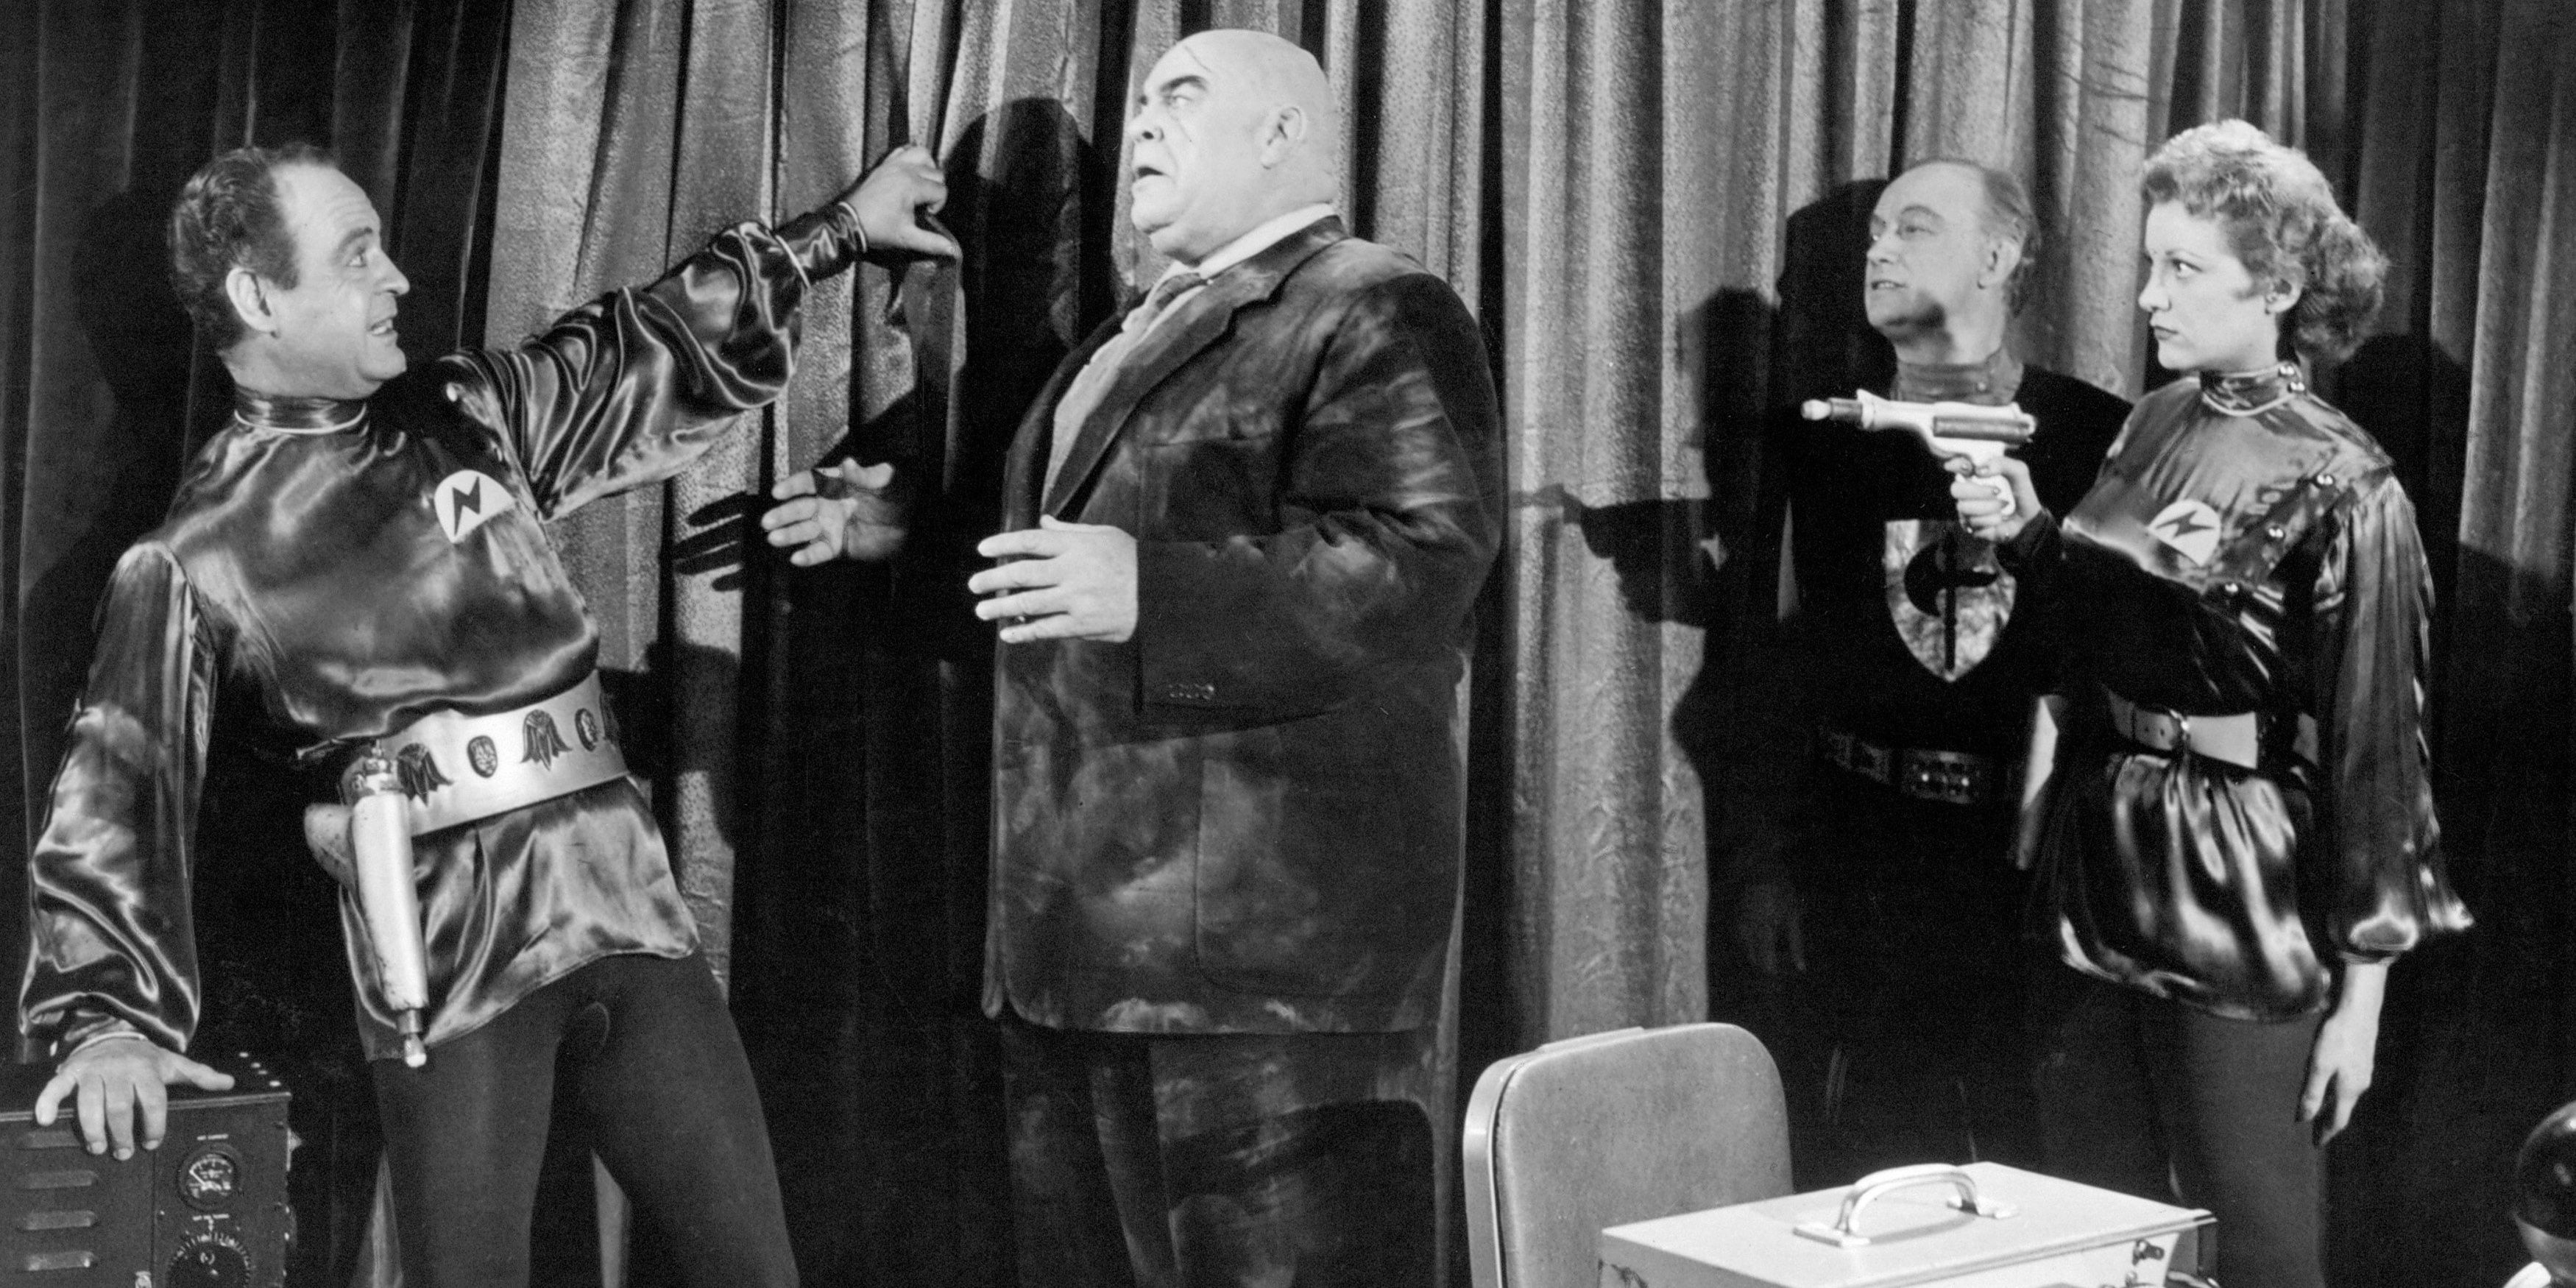 The aliens and undead from Plan 9 From Outer Space